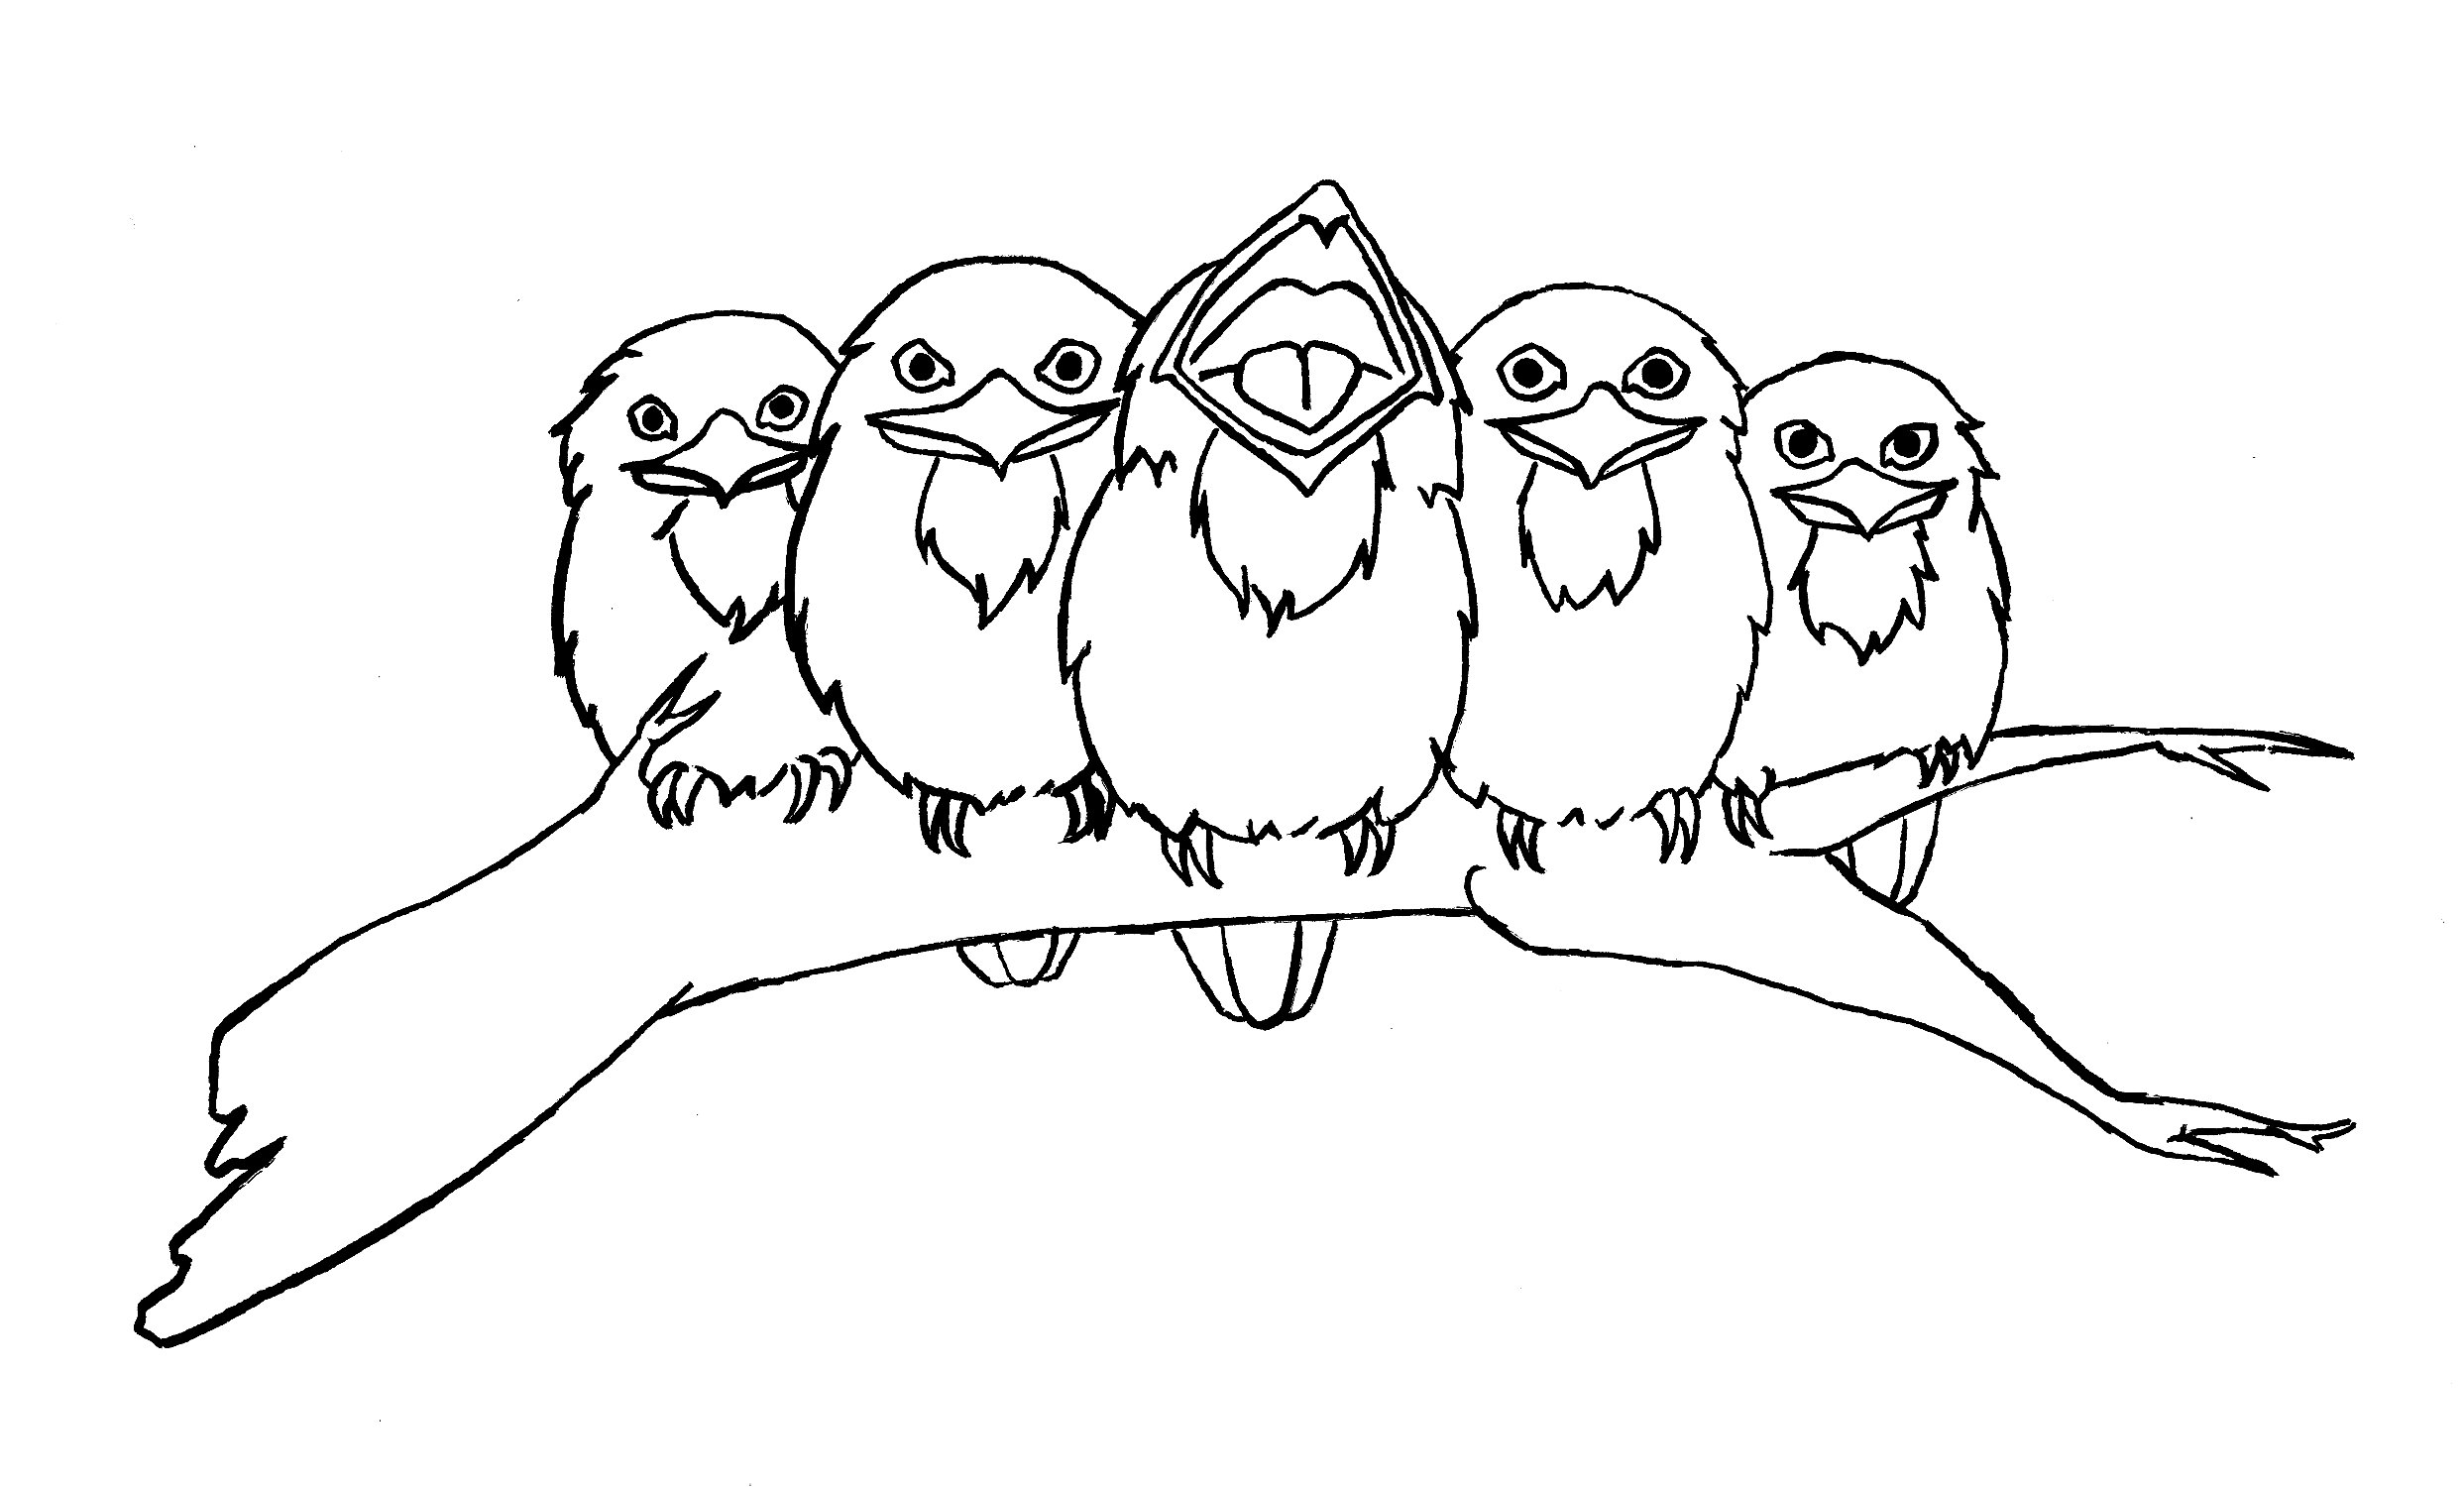 Tawny Frogmouth coloring #7, Download drawings